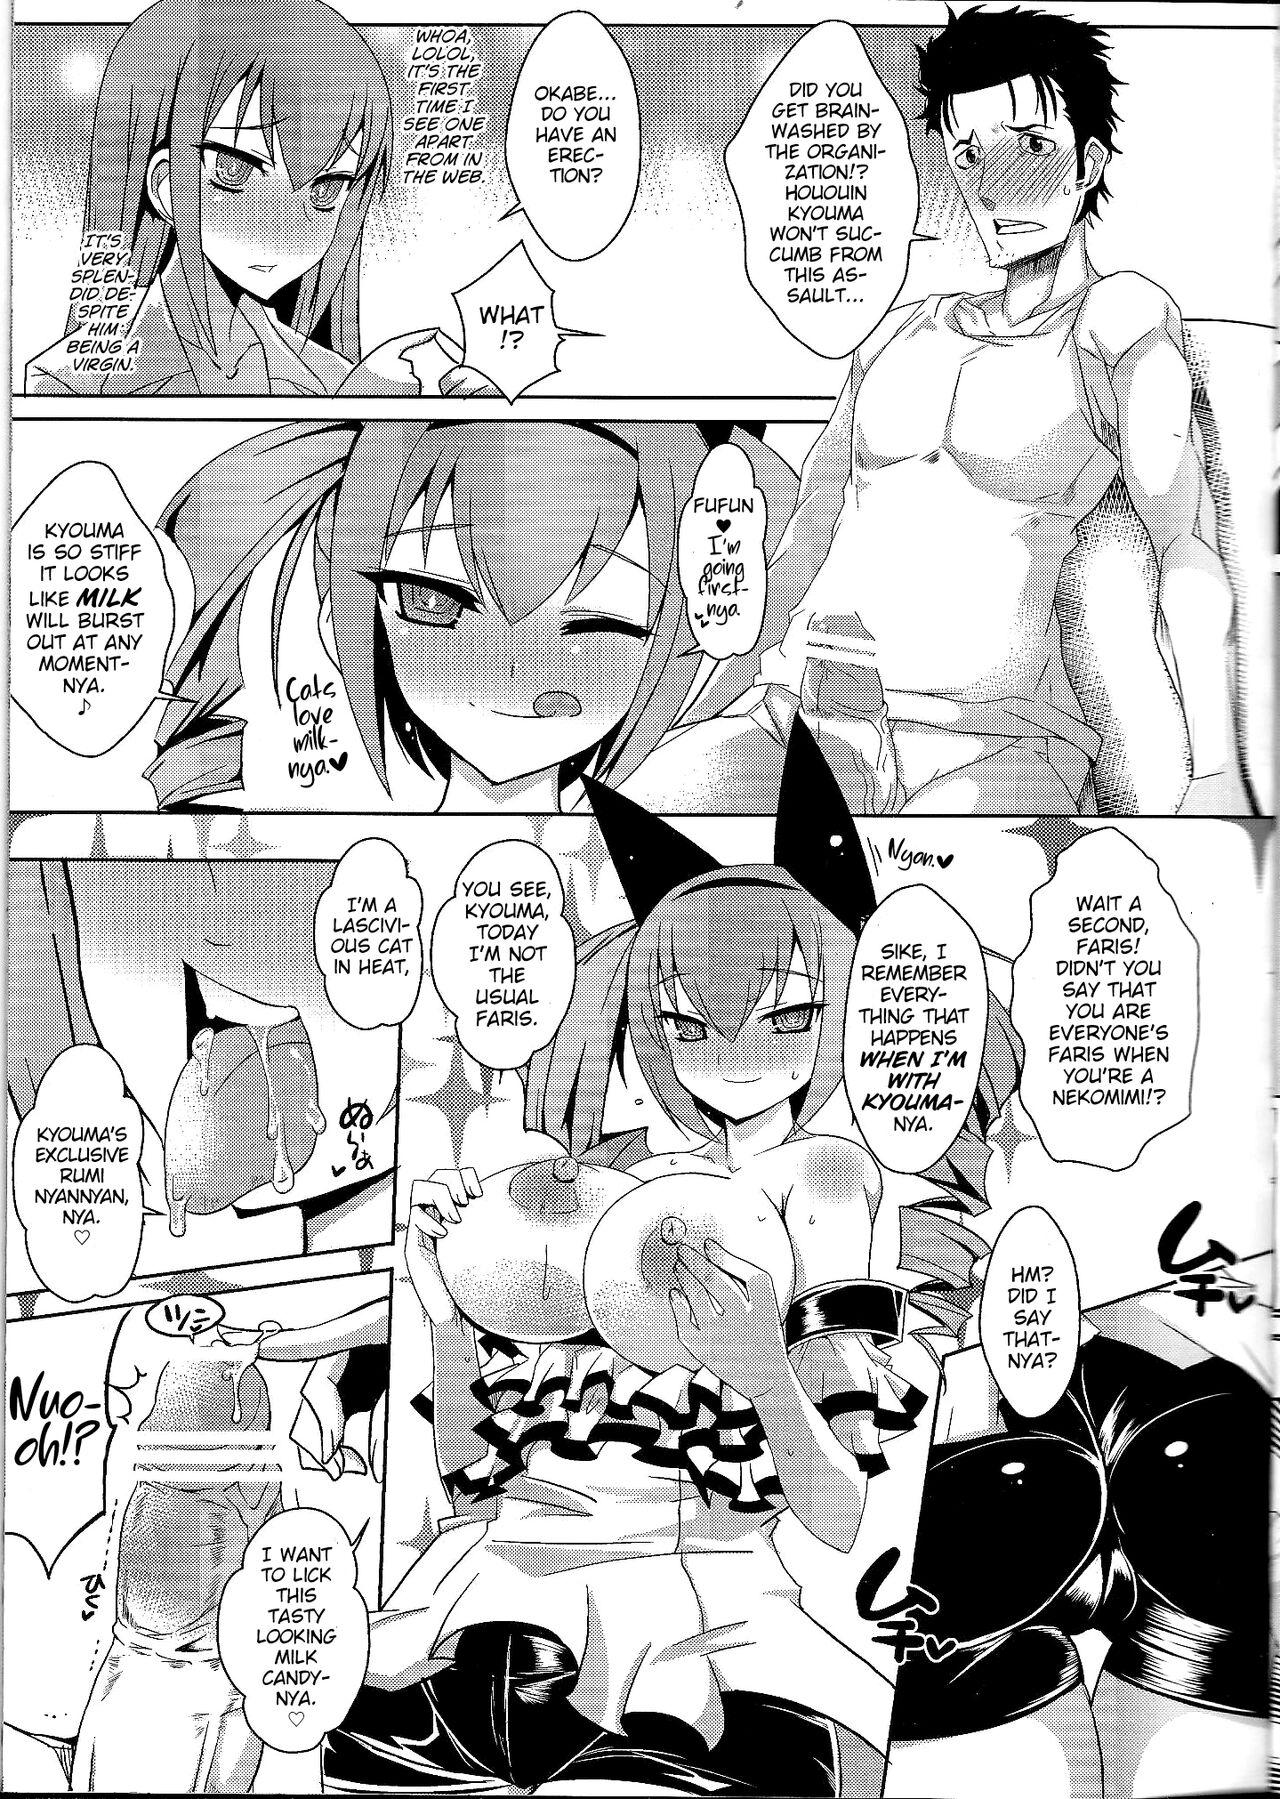 Cuckolding Kenjin Chijou no Sodoministers - Steinsgate Job - Page 8